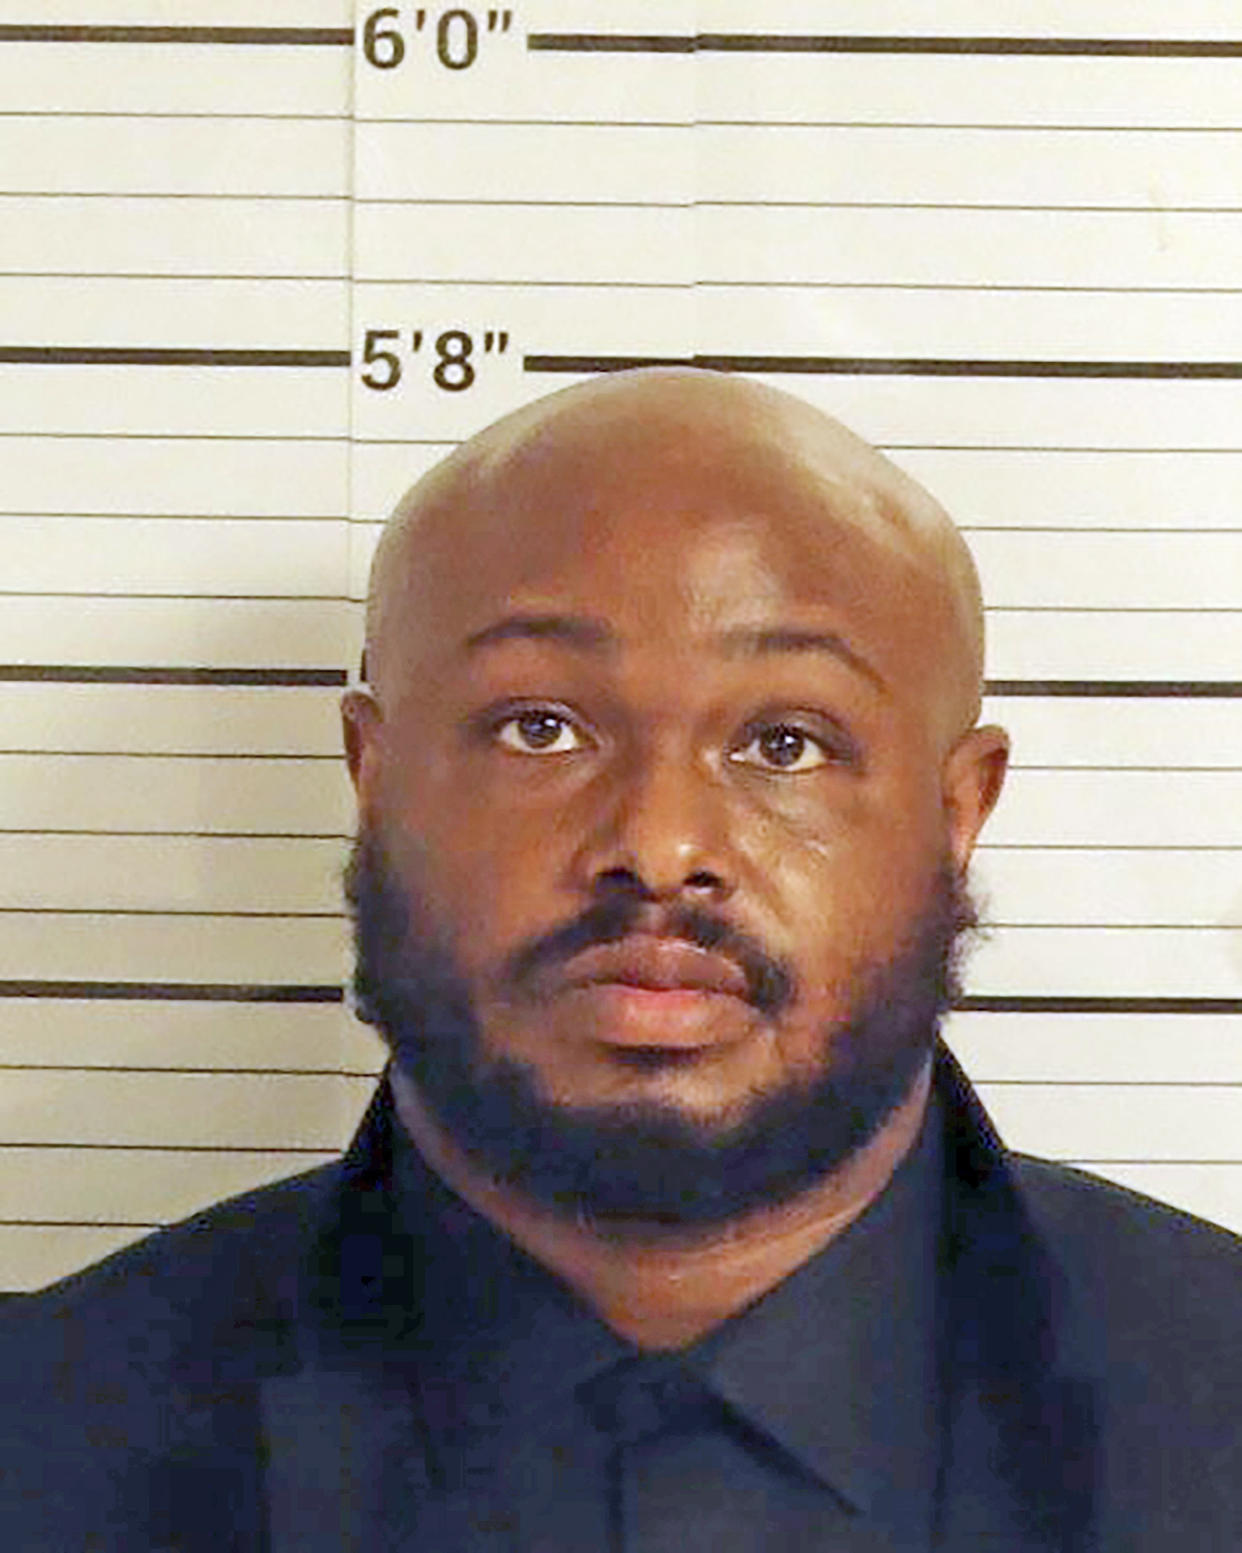 FILE - This Wednesday, Jan. 26, 2023, booking mug shot released by Shelby County Sheriff's Office shows former Memphis Police officer Desmond Mills, Jr., in Memphis, Tenn. Four of five former Memphis police officers charged with murder in the beating death of Tyre Nichols cannot work as law enforcement officers again in Tennessee, a state panel decided Friday, March 24, 2023. The Peace Officer Standards & Training Commission, or P.O.S.T., voted to decertify Demetrius Haley, Emmitt Martin and Justin Smith during a meeting Friday (Shelby County Sheriff's Office via AP)